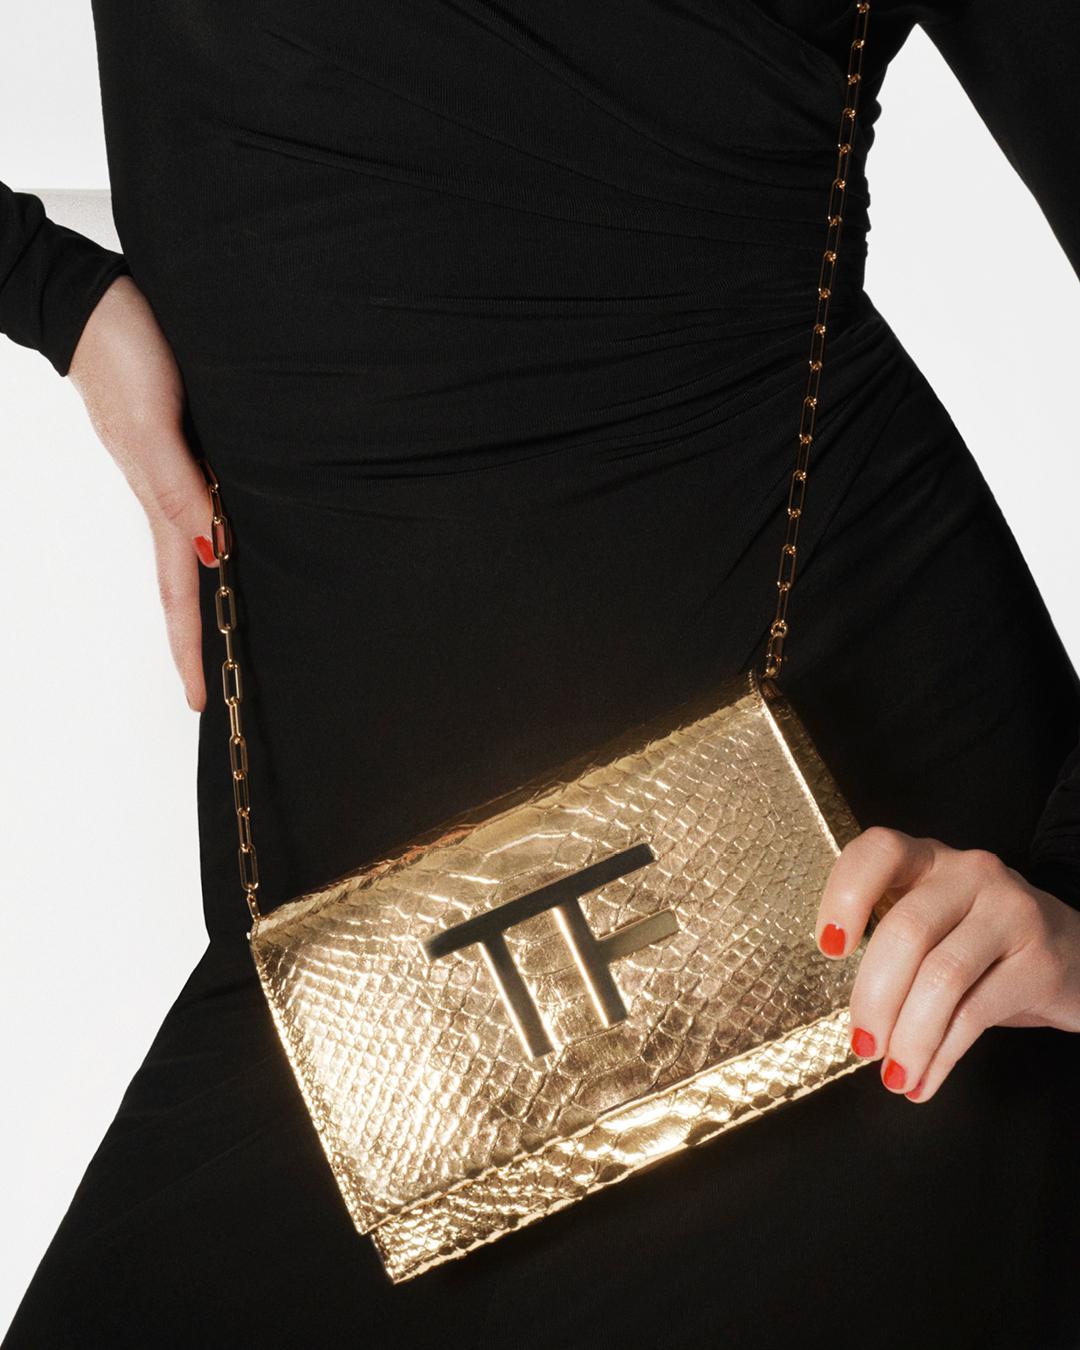 TOM FORD - Introducing the Triple Chain Bag with gold, silver and ruthenium  hardware and a TF metal logo.  #TOMFORD